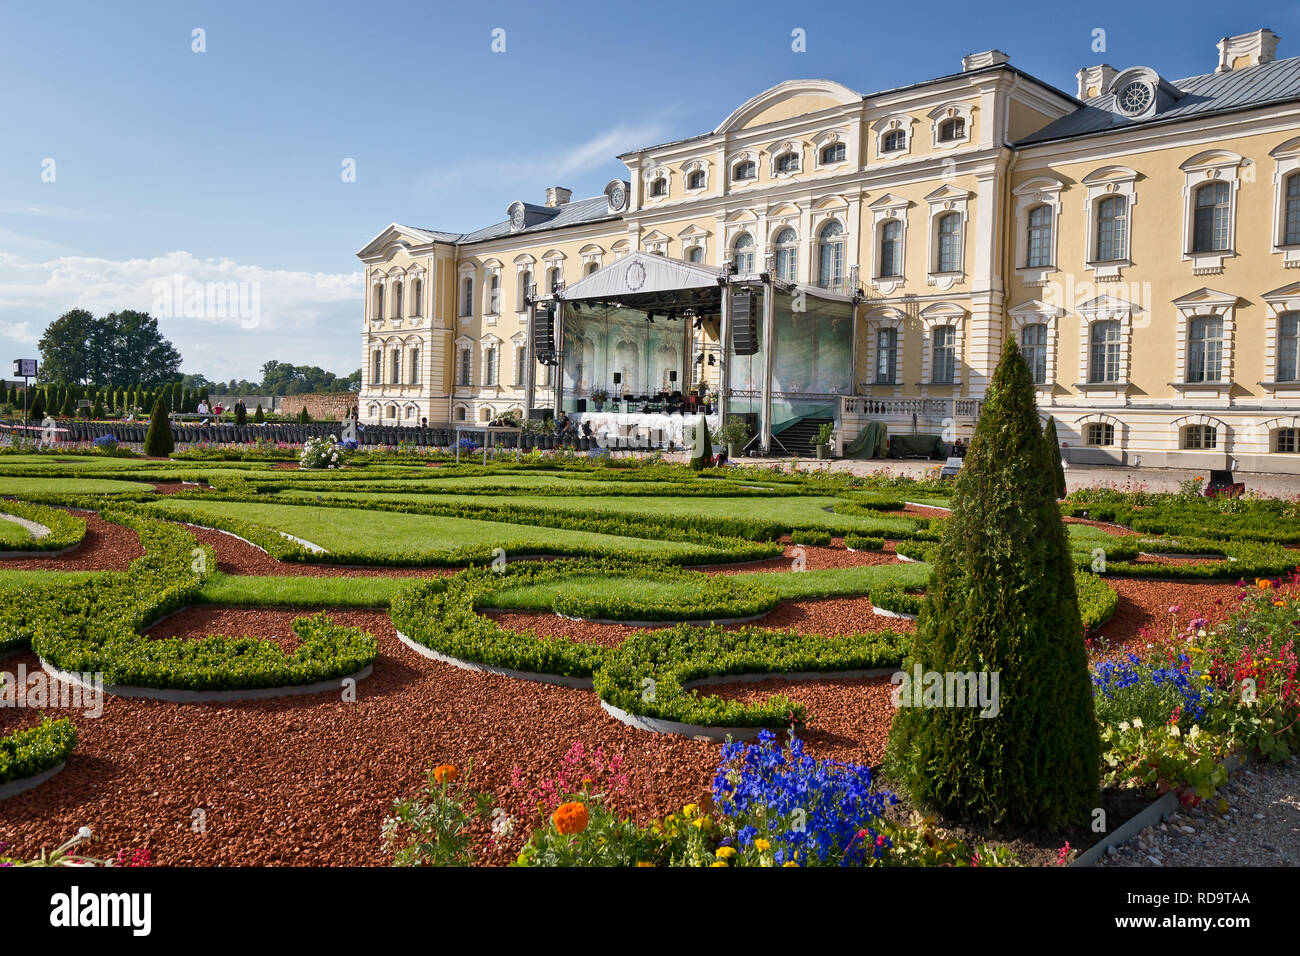 Rundales palace prepared for classical music concert, Latvia Stock Photo